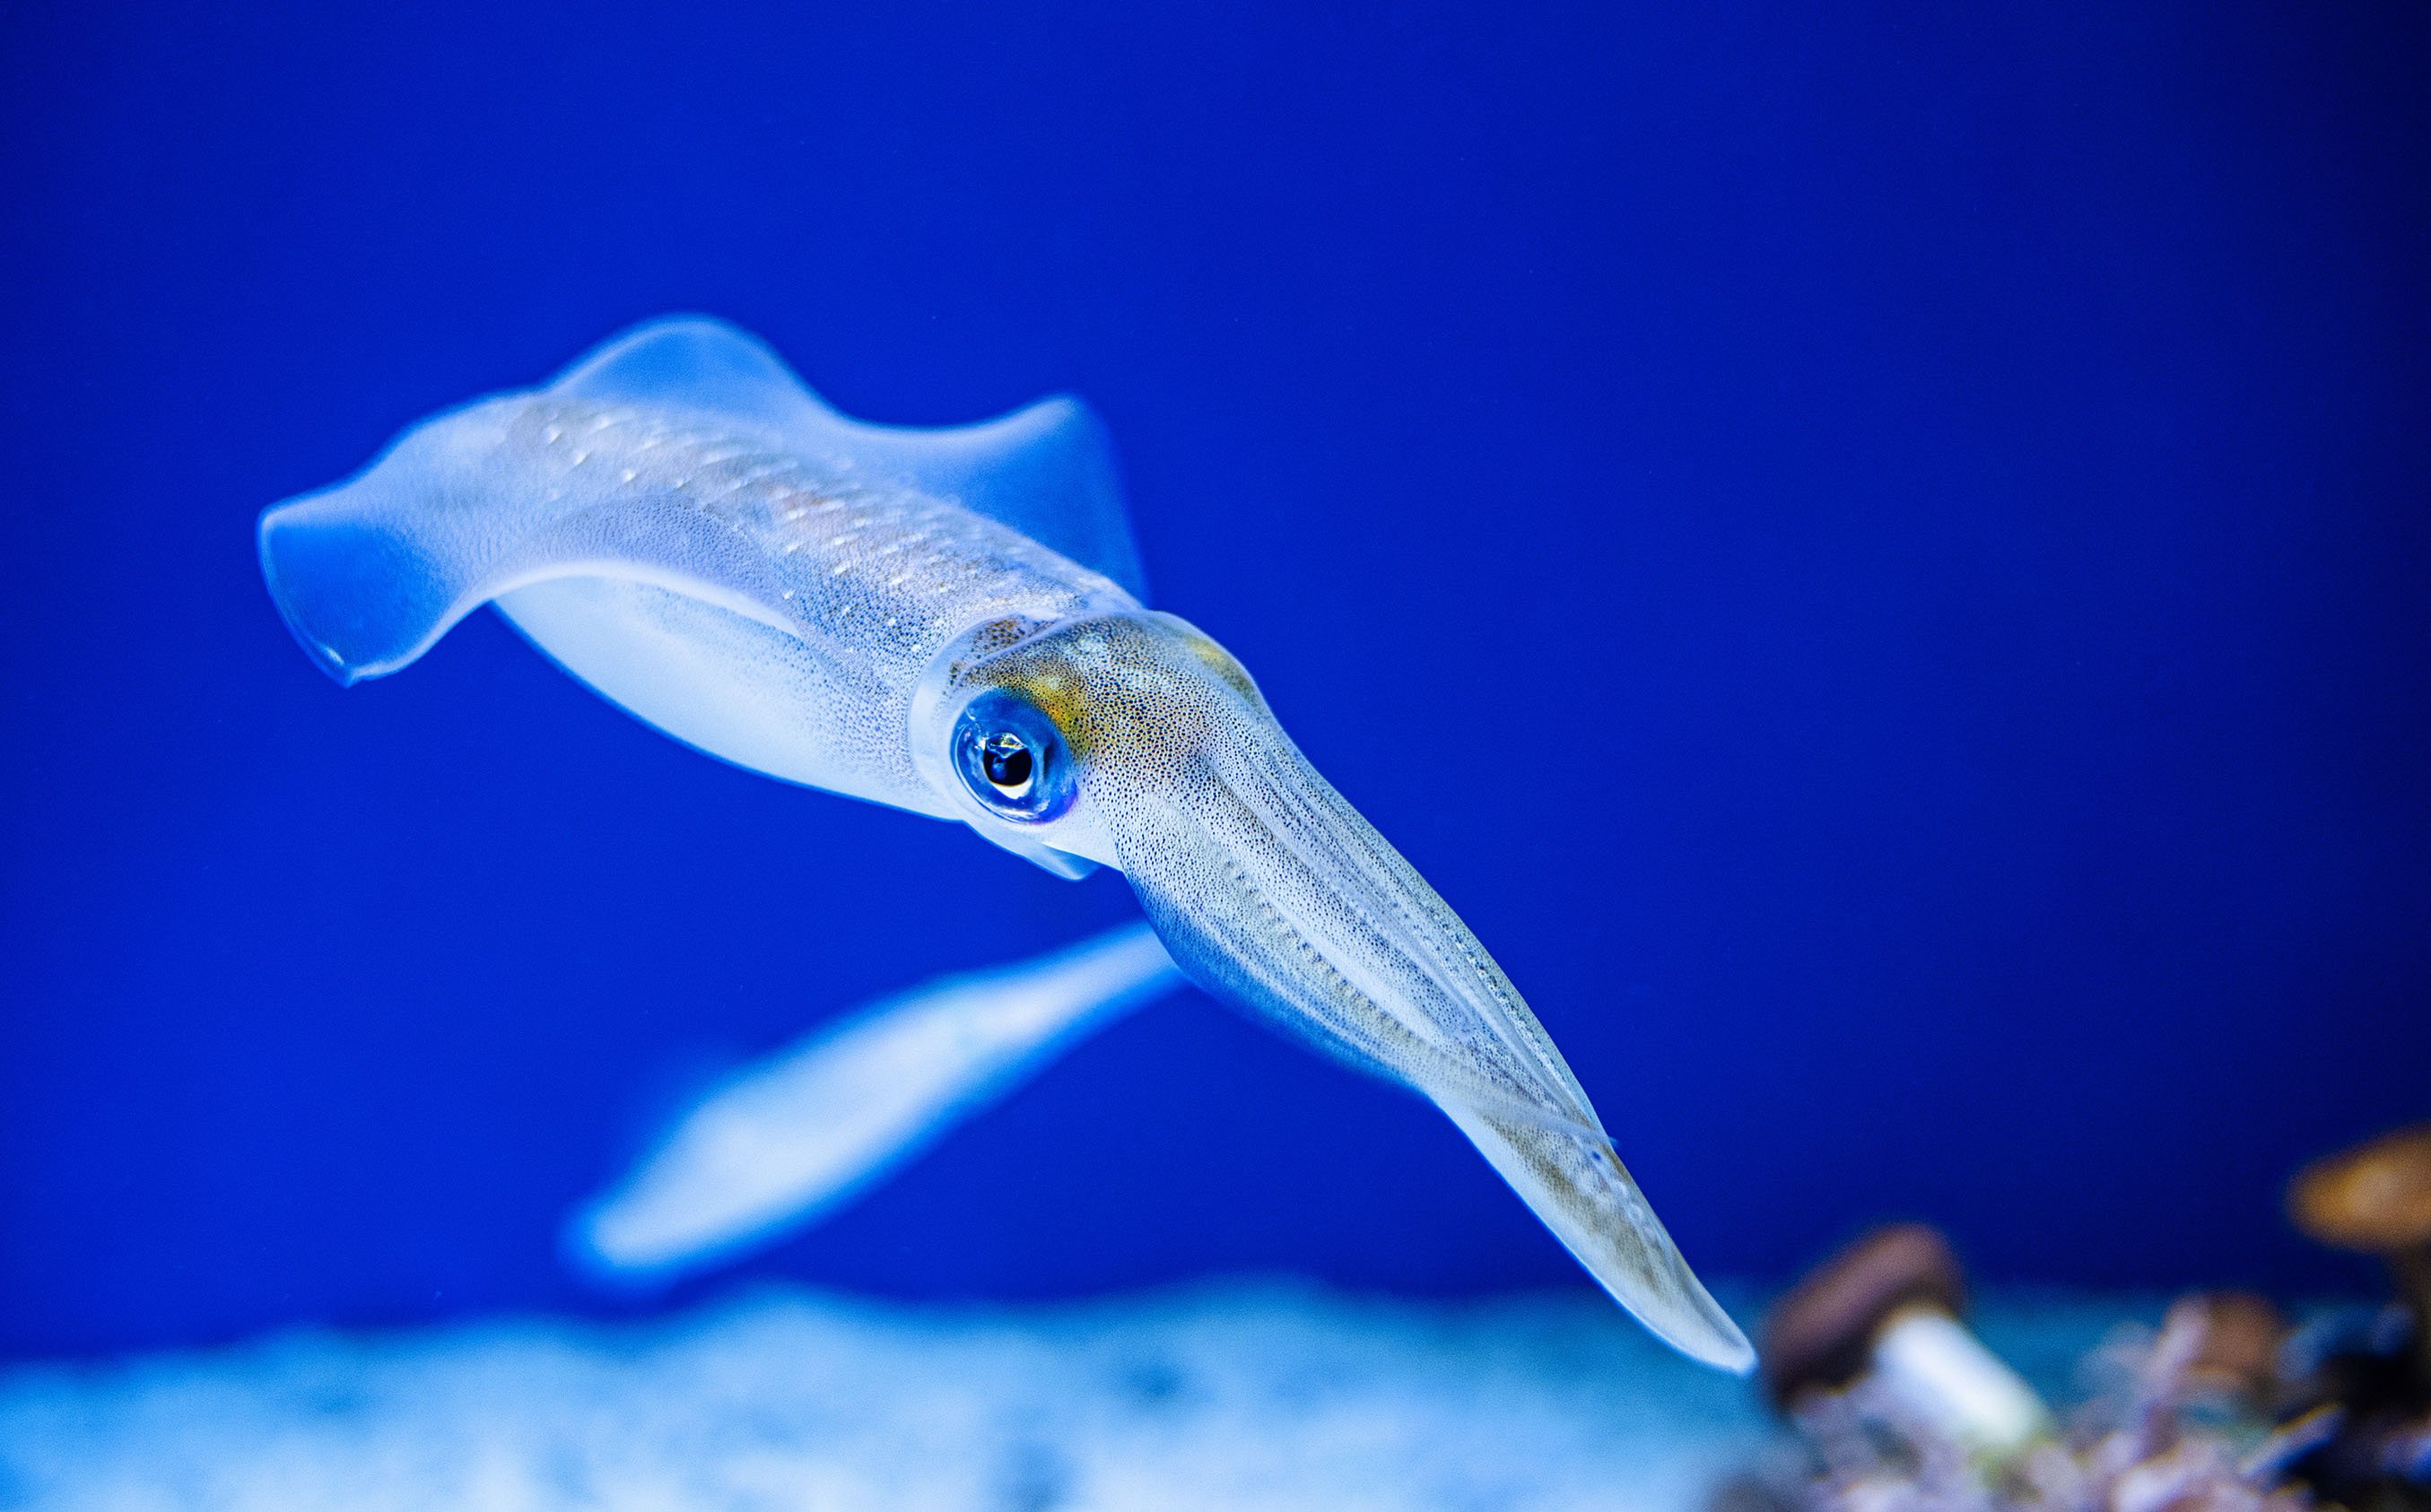 A Longfin Inshore Squid swims in blue water. The Town Dock packs Longfin in our Rhode Island Calamari® product line. Apply for one of our Rhode Island jobs and be part of the process!